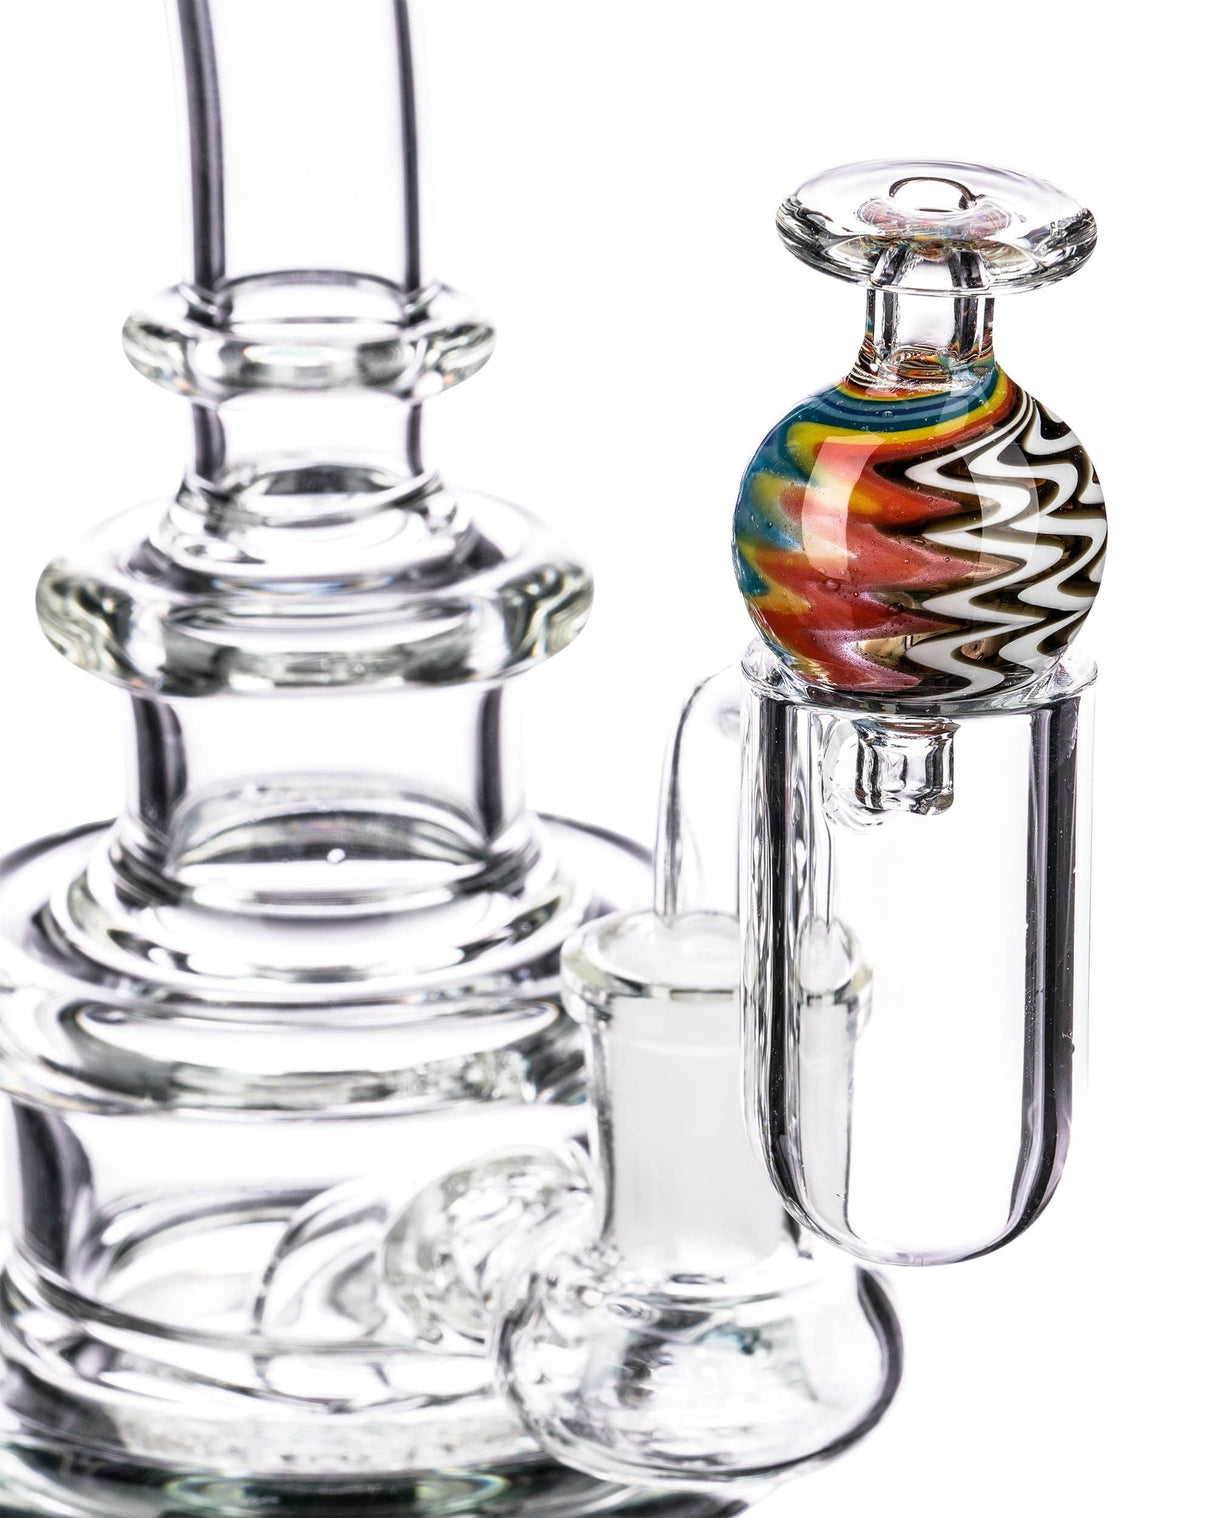 Wig Wag Bubble Carb Cap in black, blue, white swirls, for concentrates, borosilicate glass, 2.5" tall